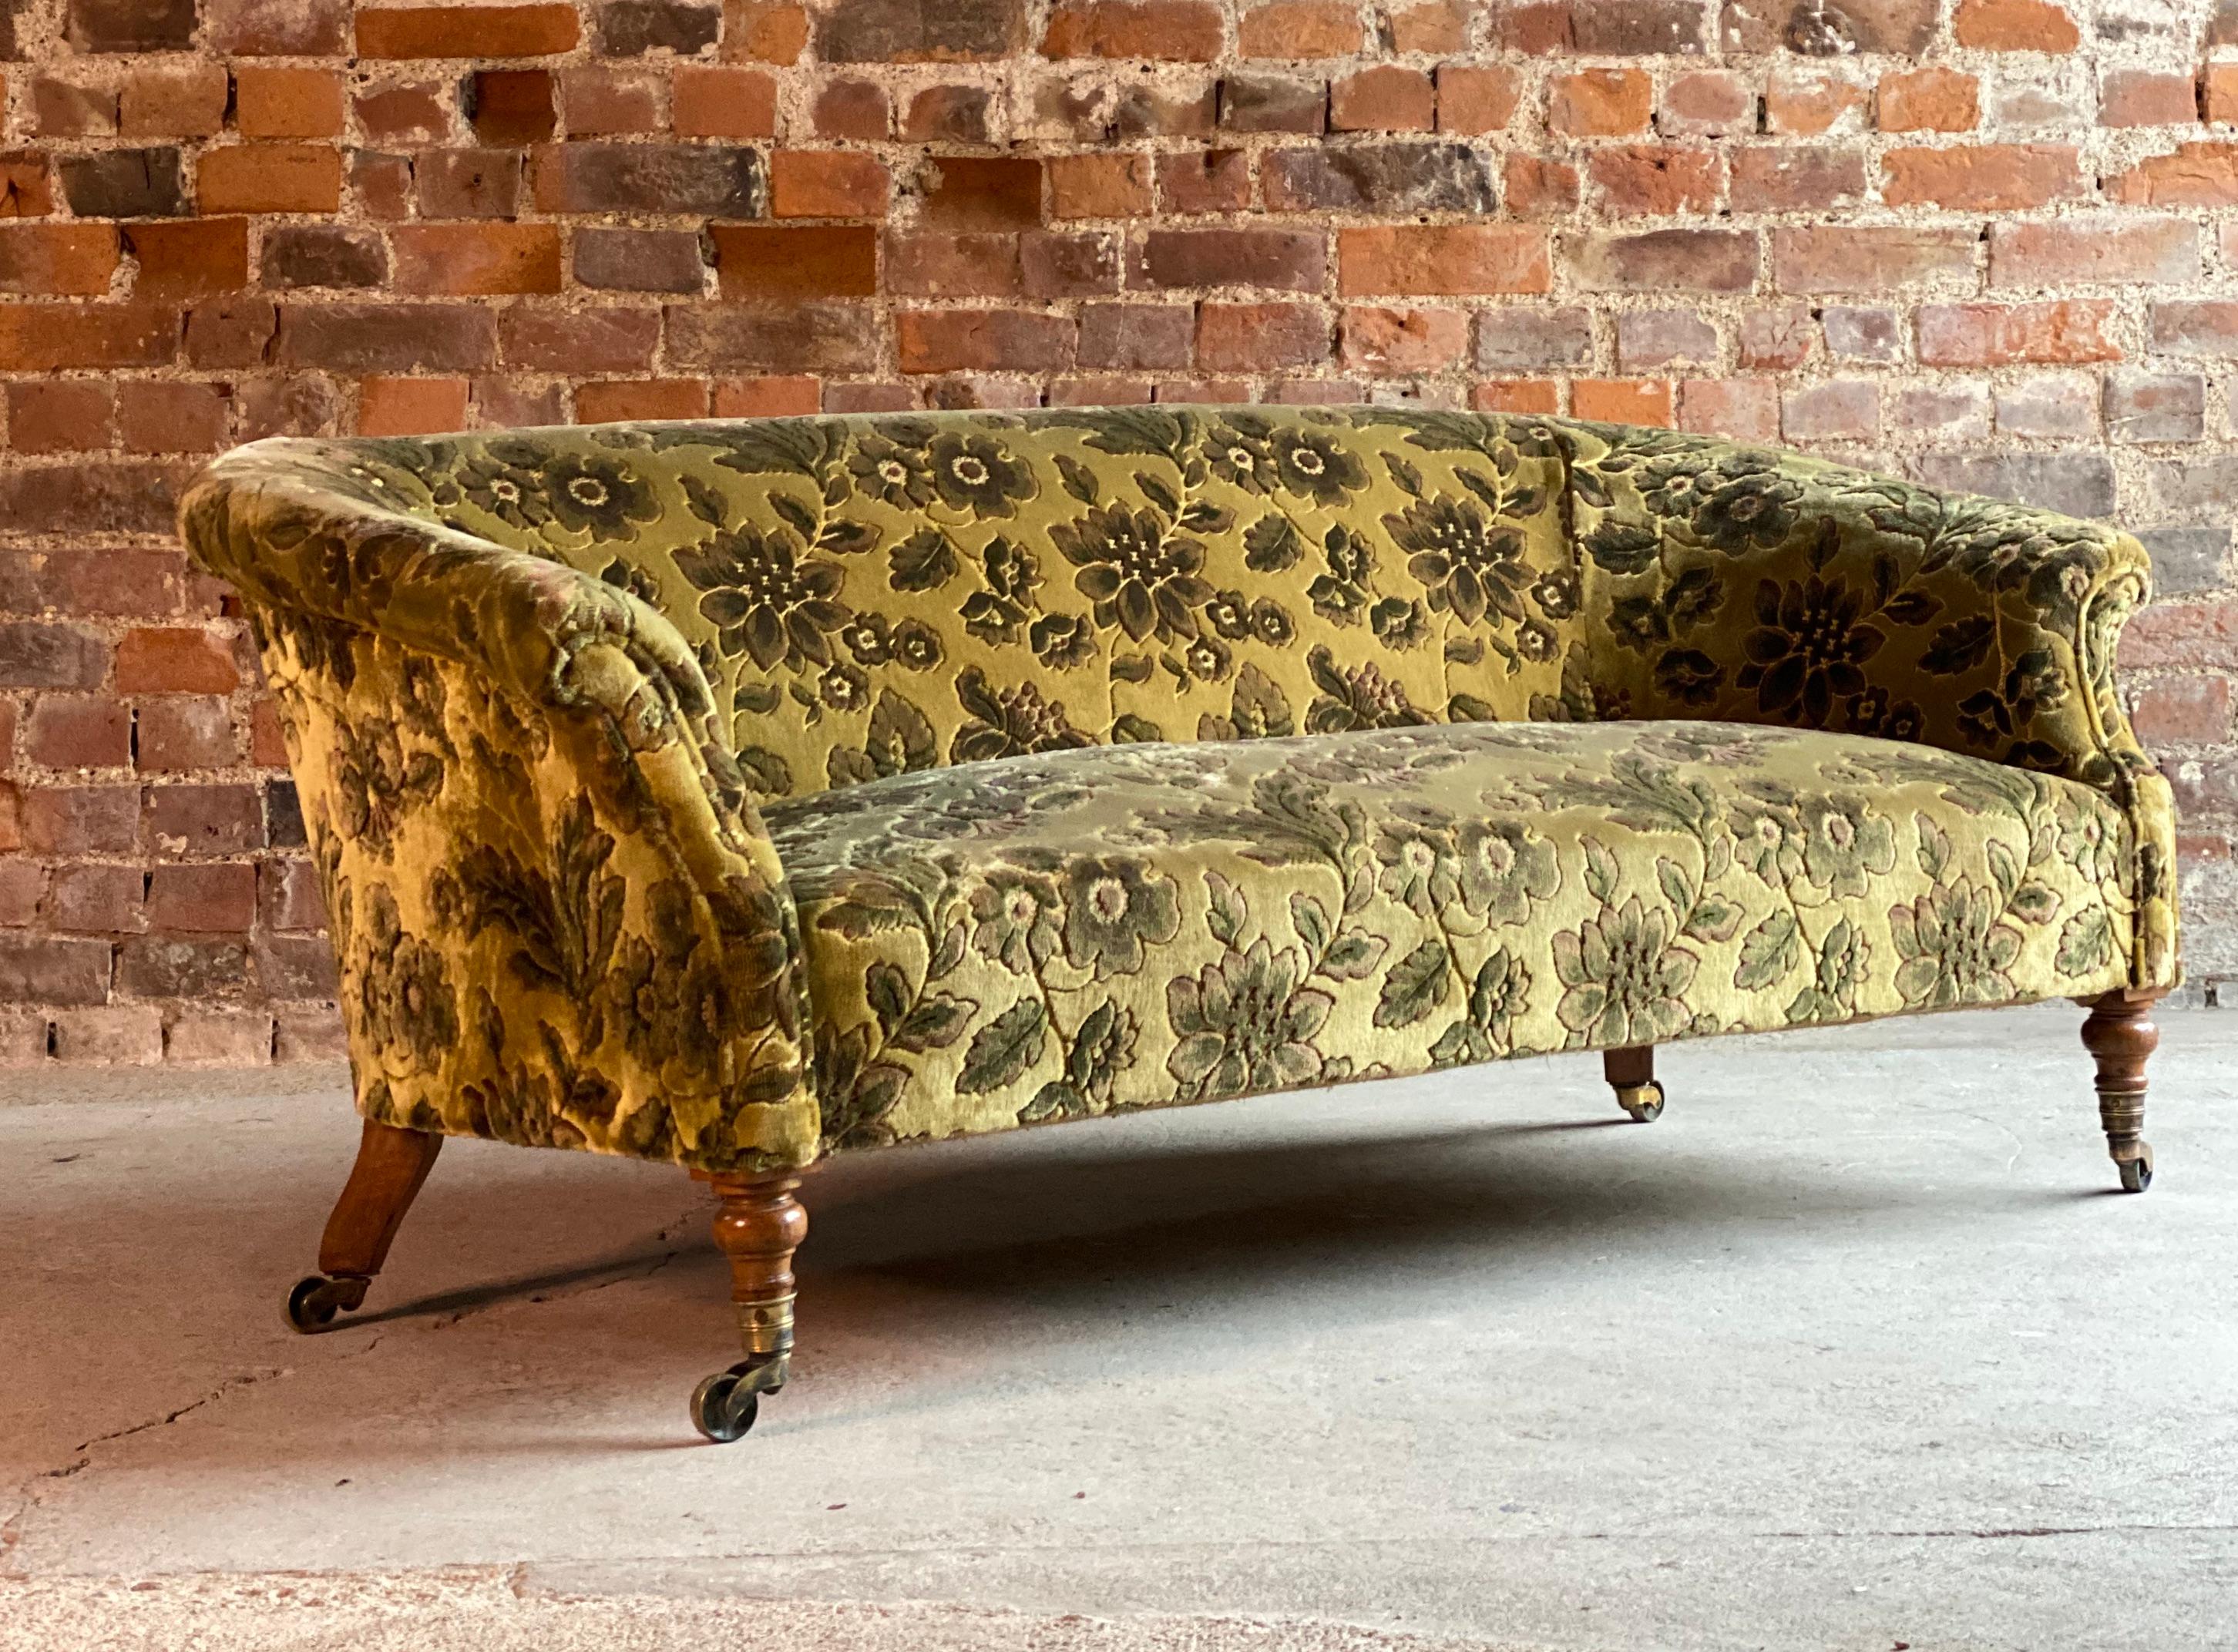 Antique Howard & Sons sofa three-seat, circa 1935

A magnificent antique Howard & Son sofa circa 1935, covered in a deep soft velvet fabric in Golds & Greens with floral pattern, coiled sprung seat, turned mahogany legs terminating in brass